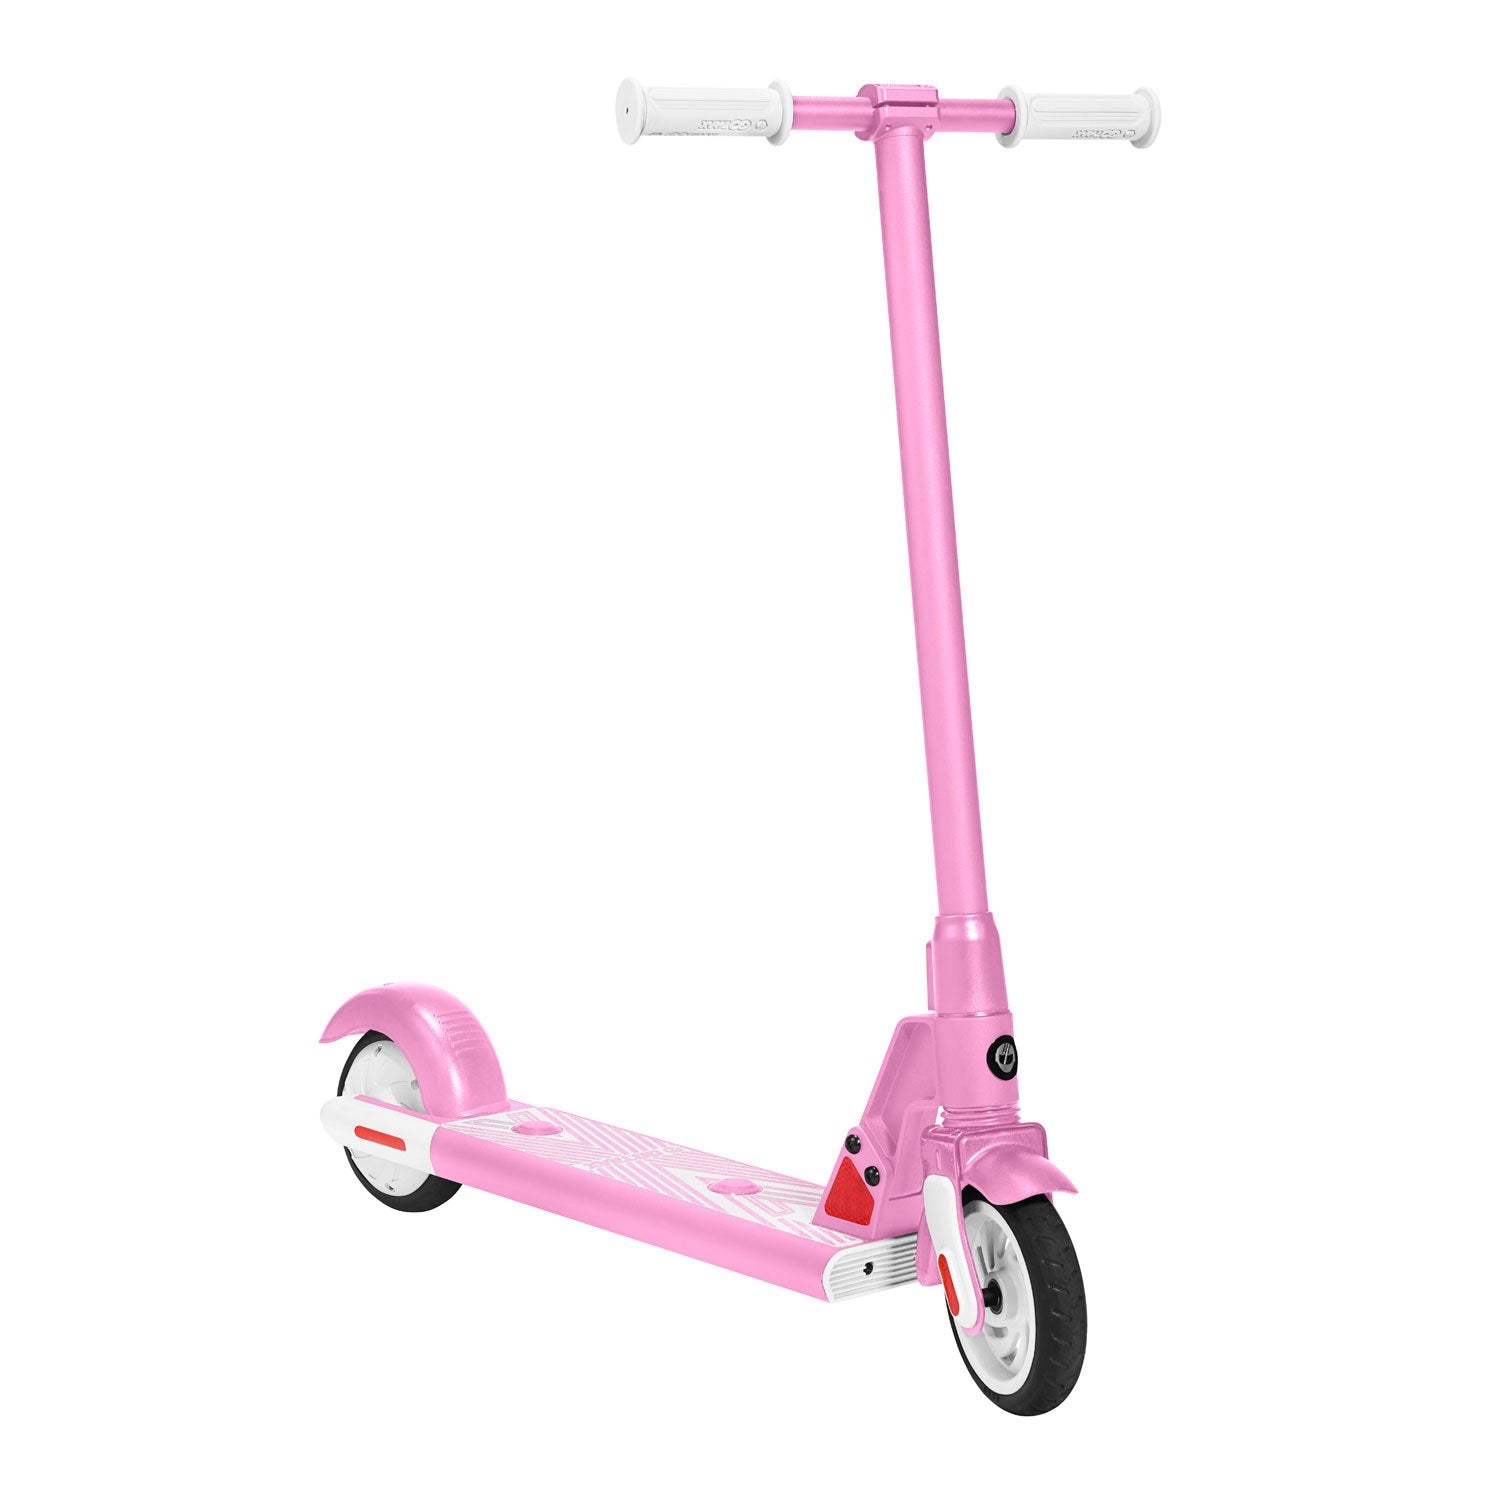 Pink gks electric scooter for kids angle image